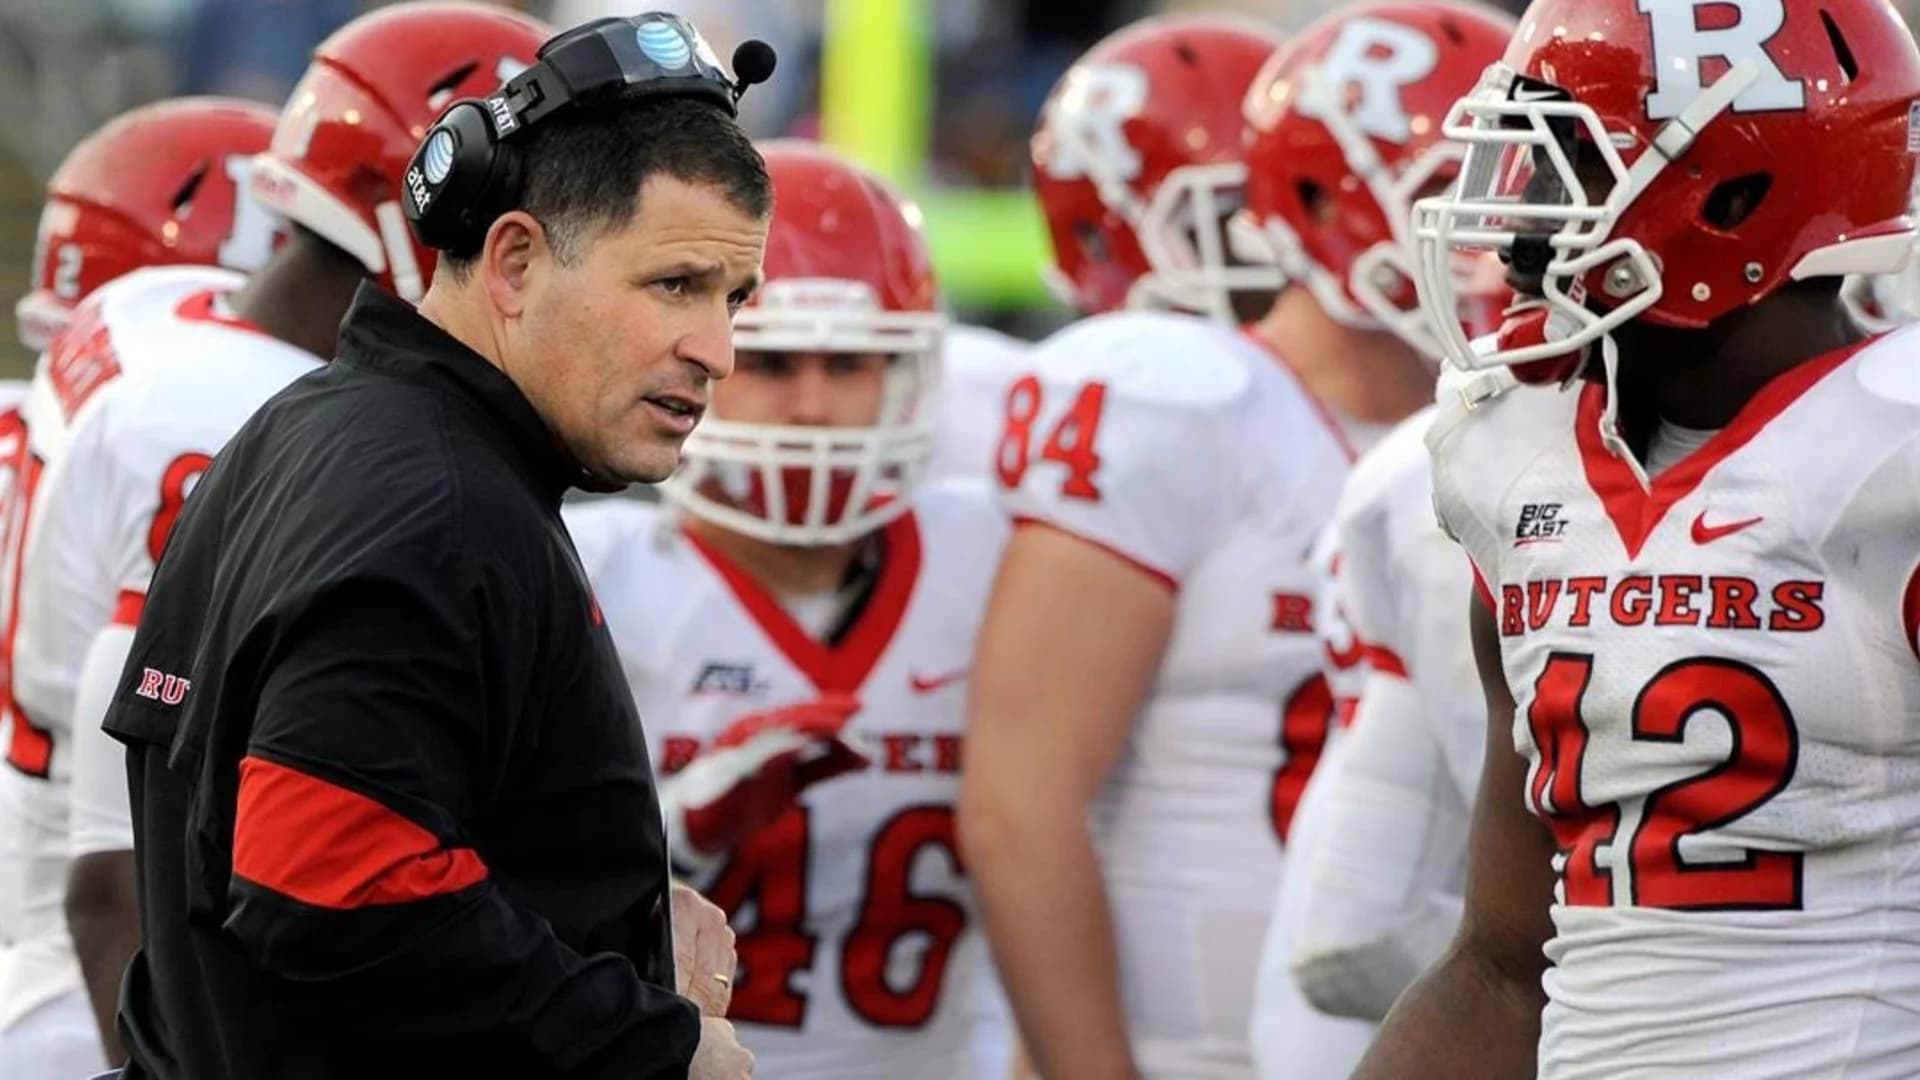 Rutgers hires Schiano to rebuild Scarlet Knights, again